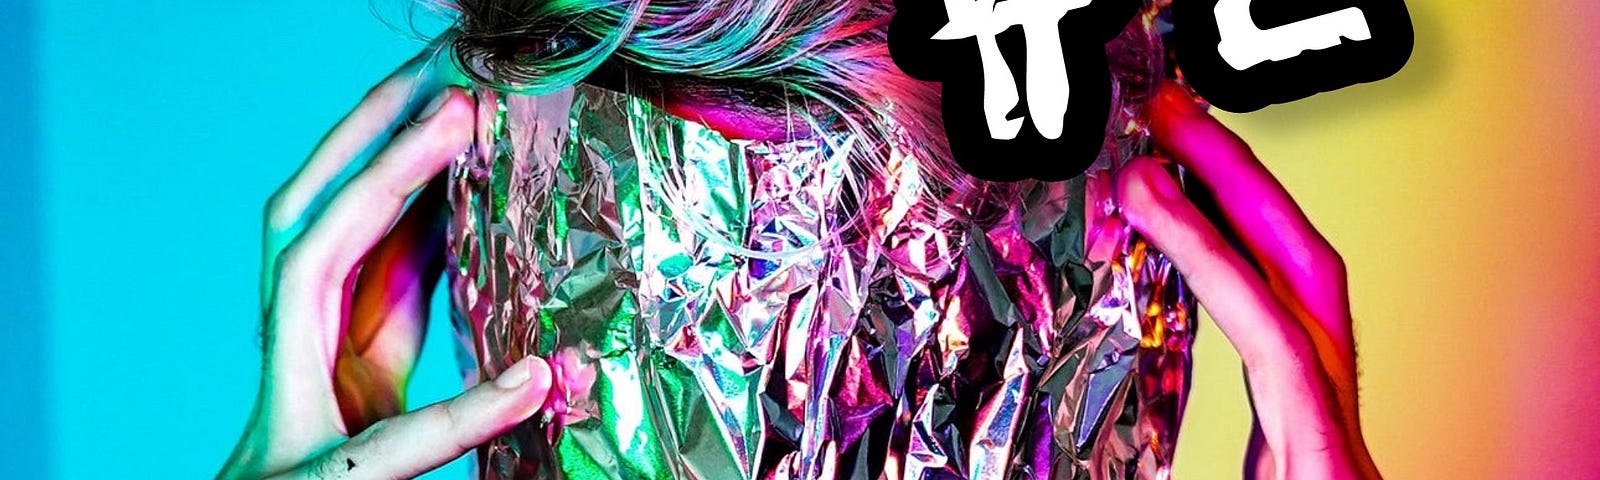 Close-up of a person with tin foil wrapped around their head and face, with both hands/fingers at either side of their head as though they’re holding the foil on or have a headache. Rainbow multi-colored background and overlapping text heading that says PART #2